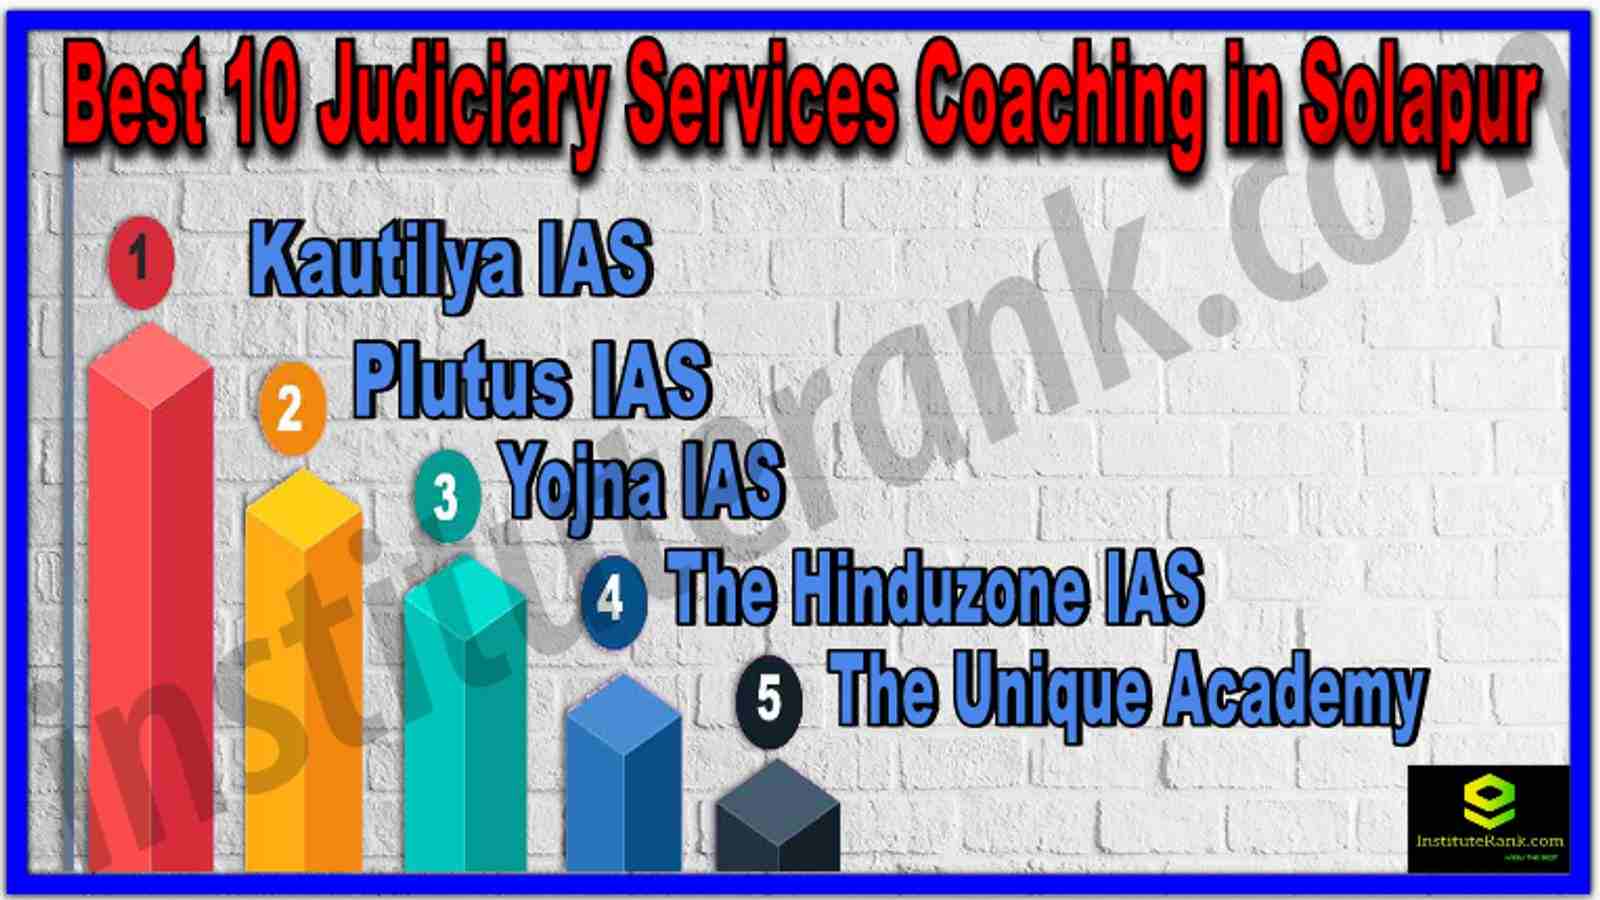 Best 10 Judiciary Services Coaching in Solapur